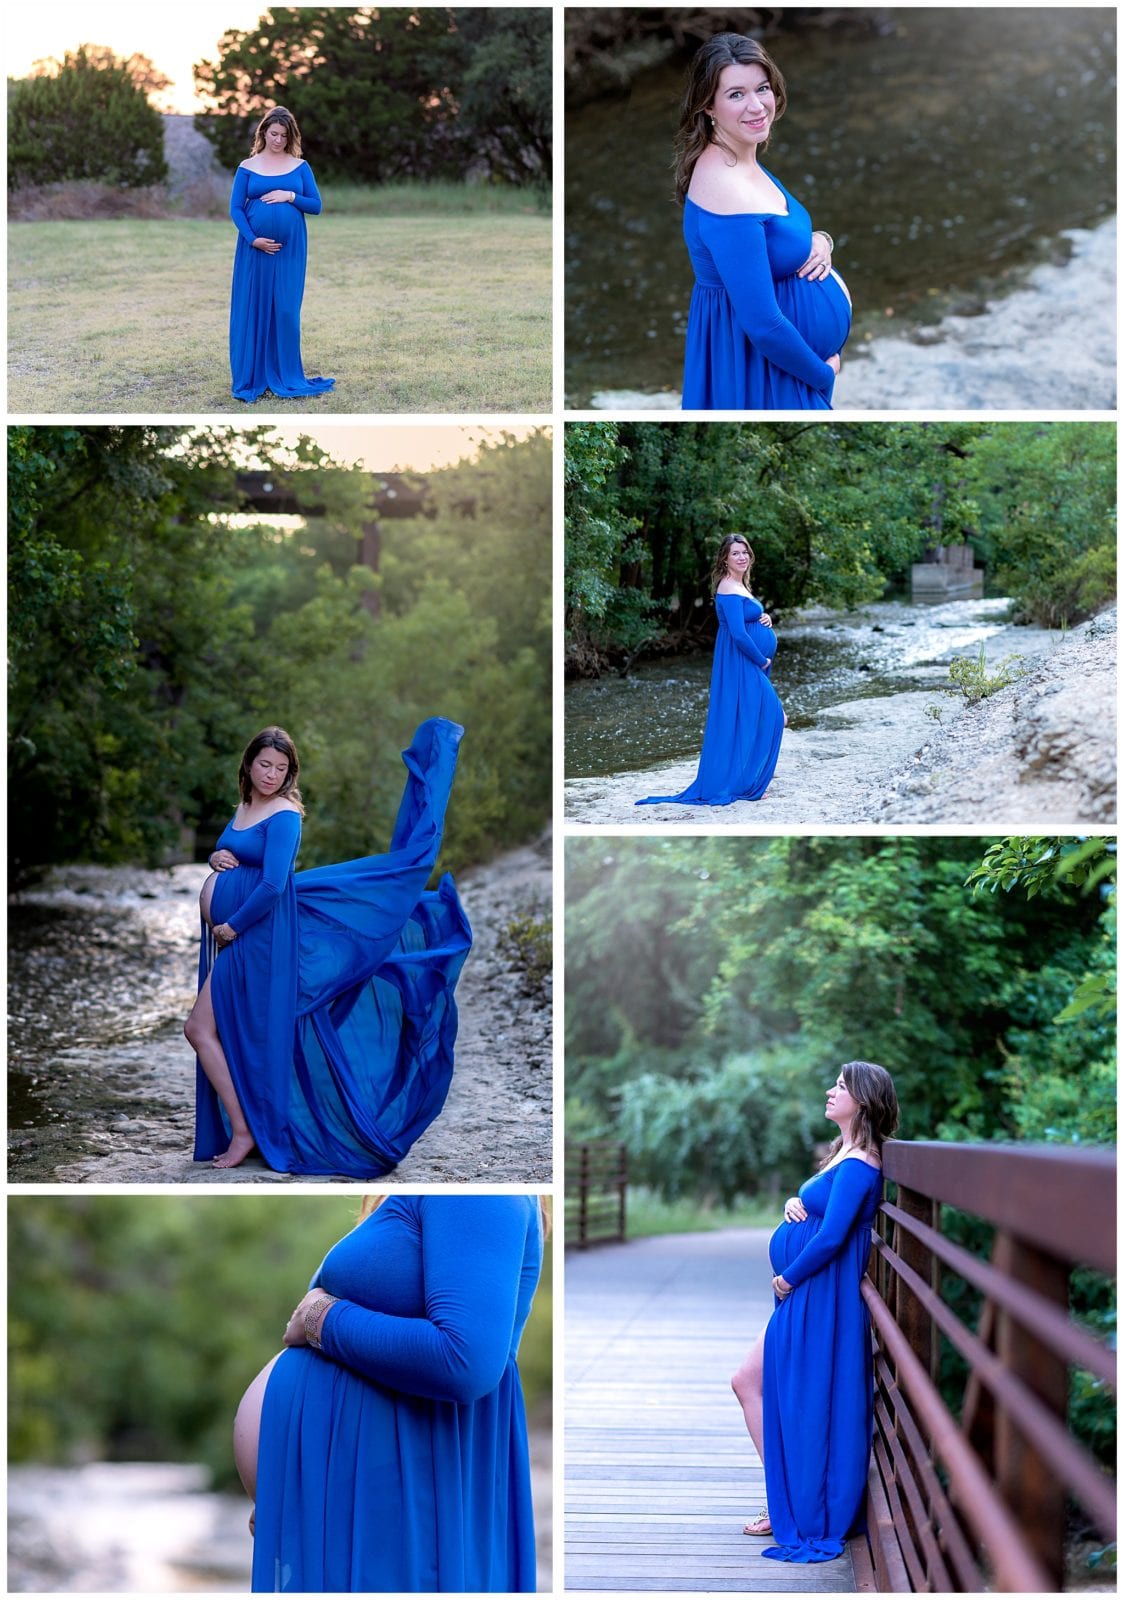 Maternity Photos in a Blue dress.